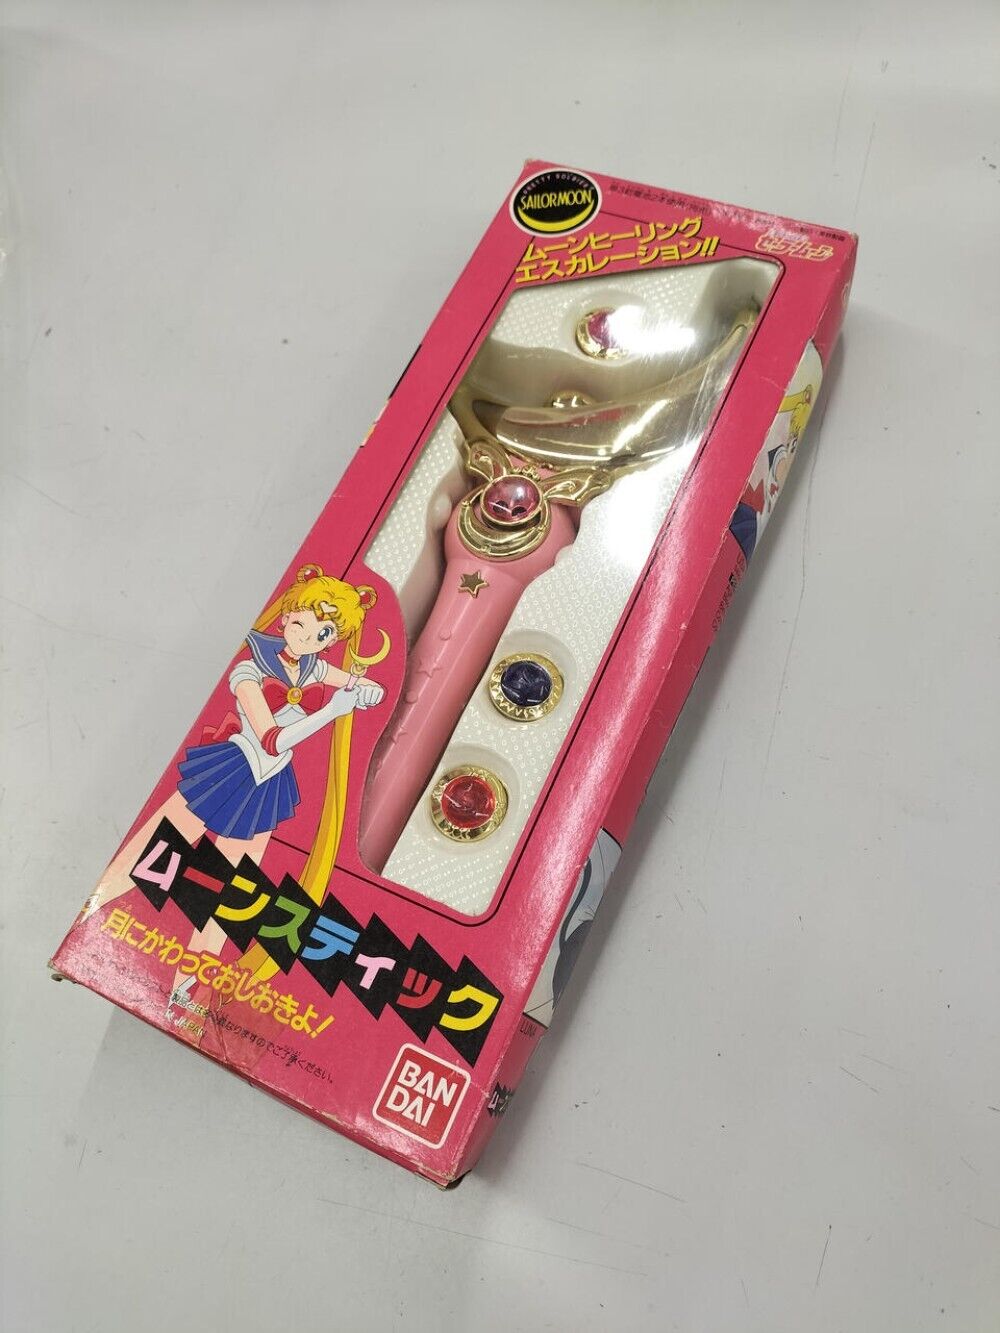 Bandai Sailor Moon Moon Stick Anime Toy Pink Battery Powered with Box Used Japan